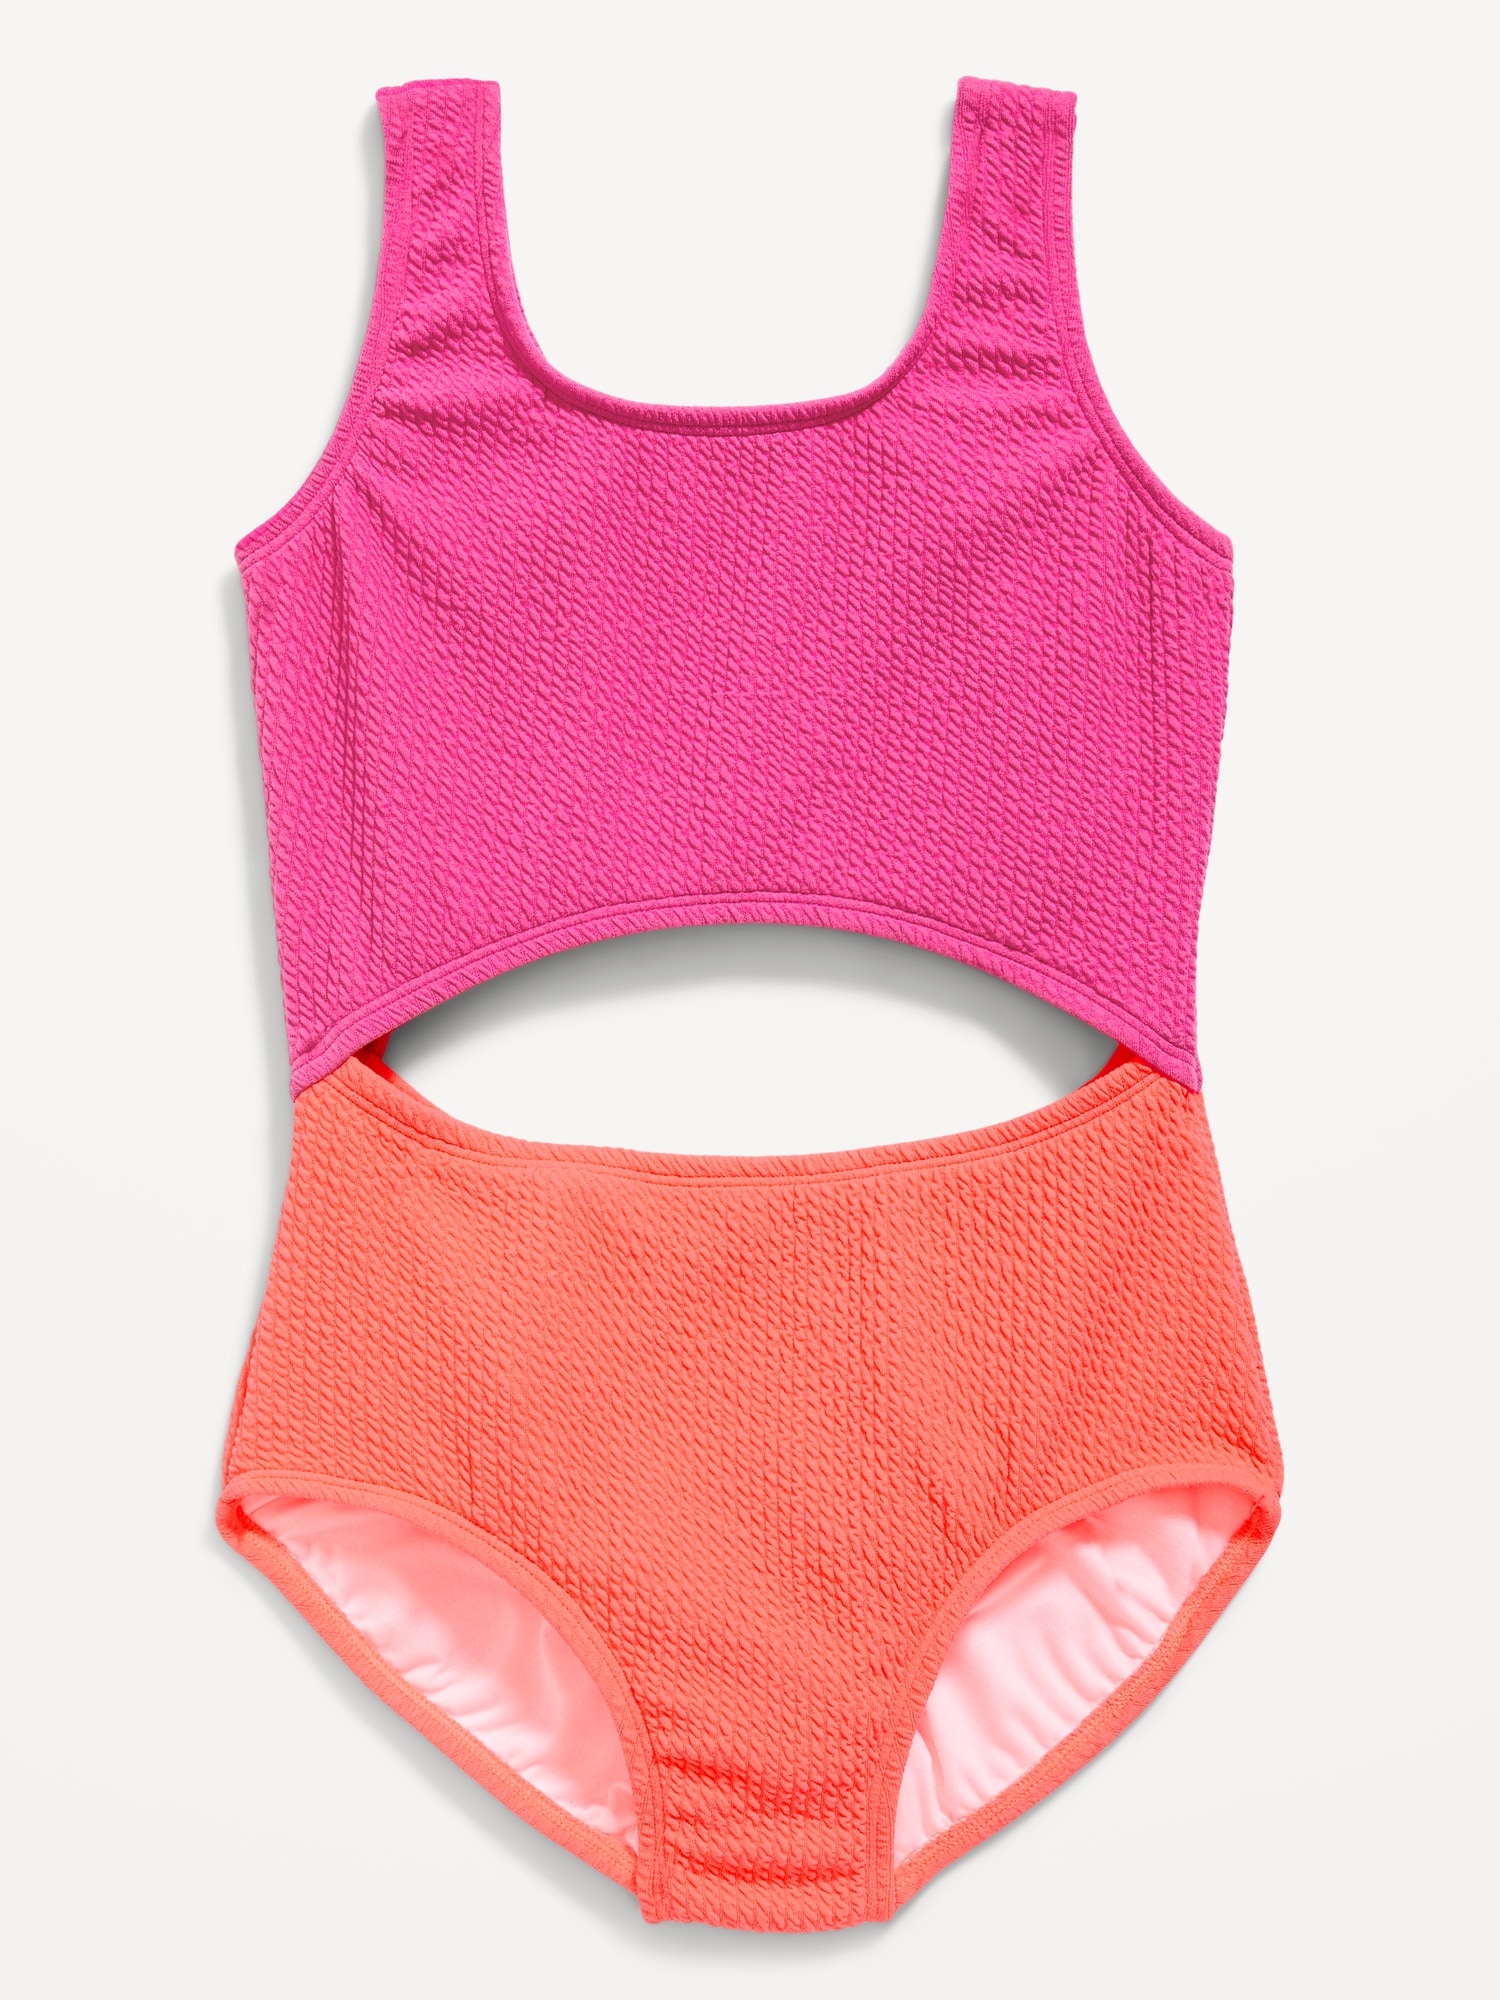 Color-Block Cutout One-Piece Swimsuit for Girls